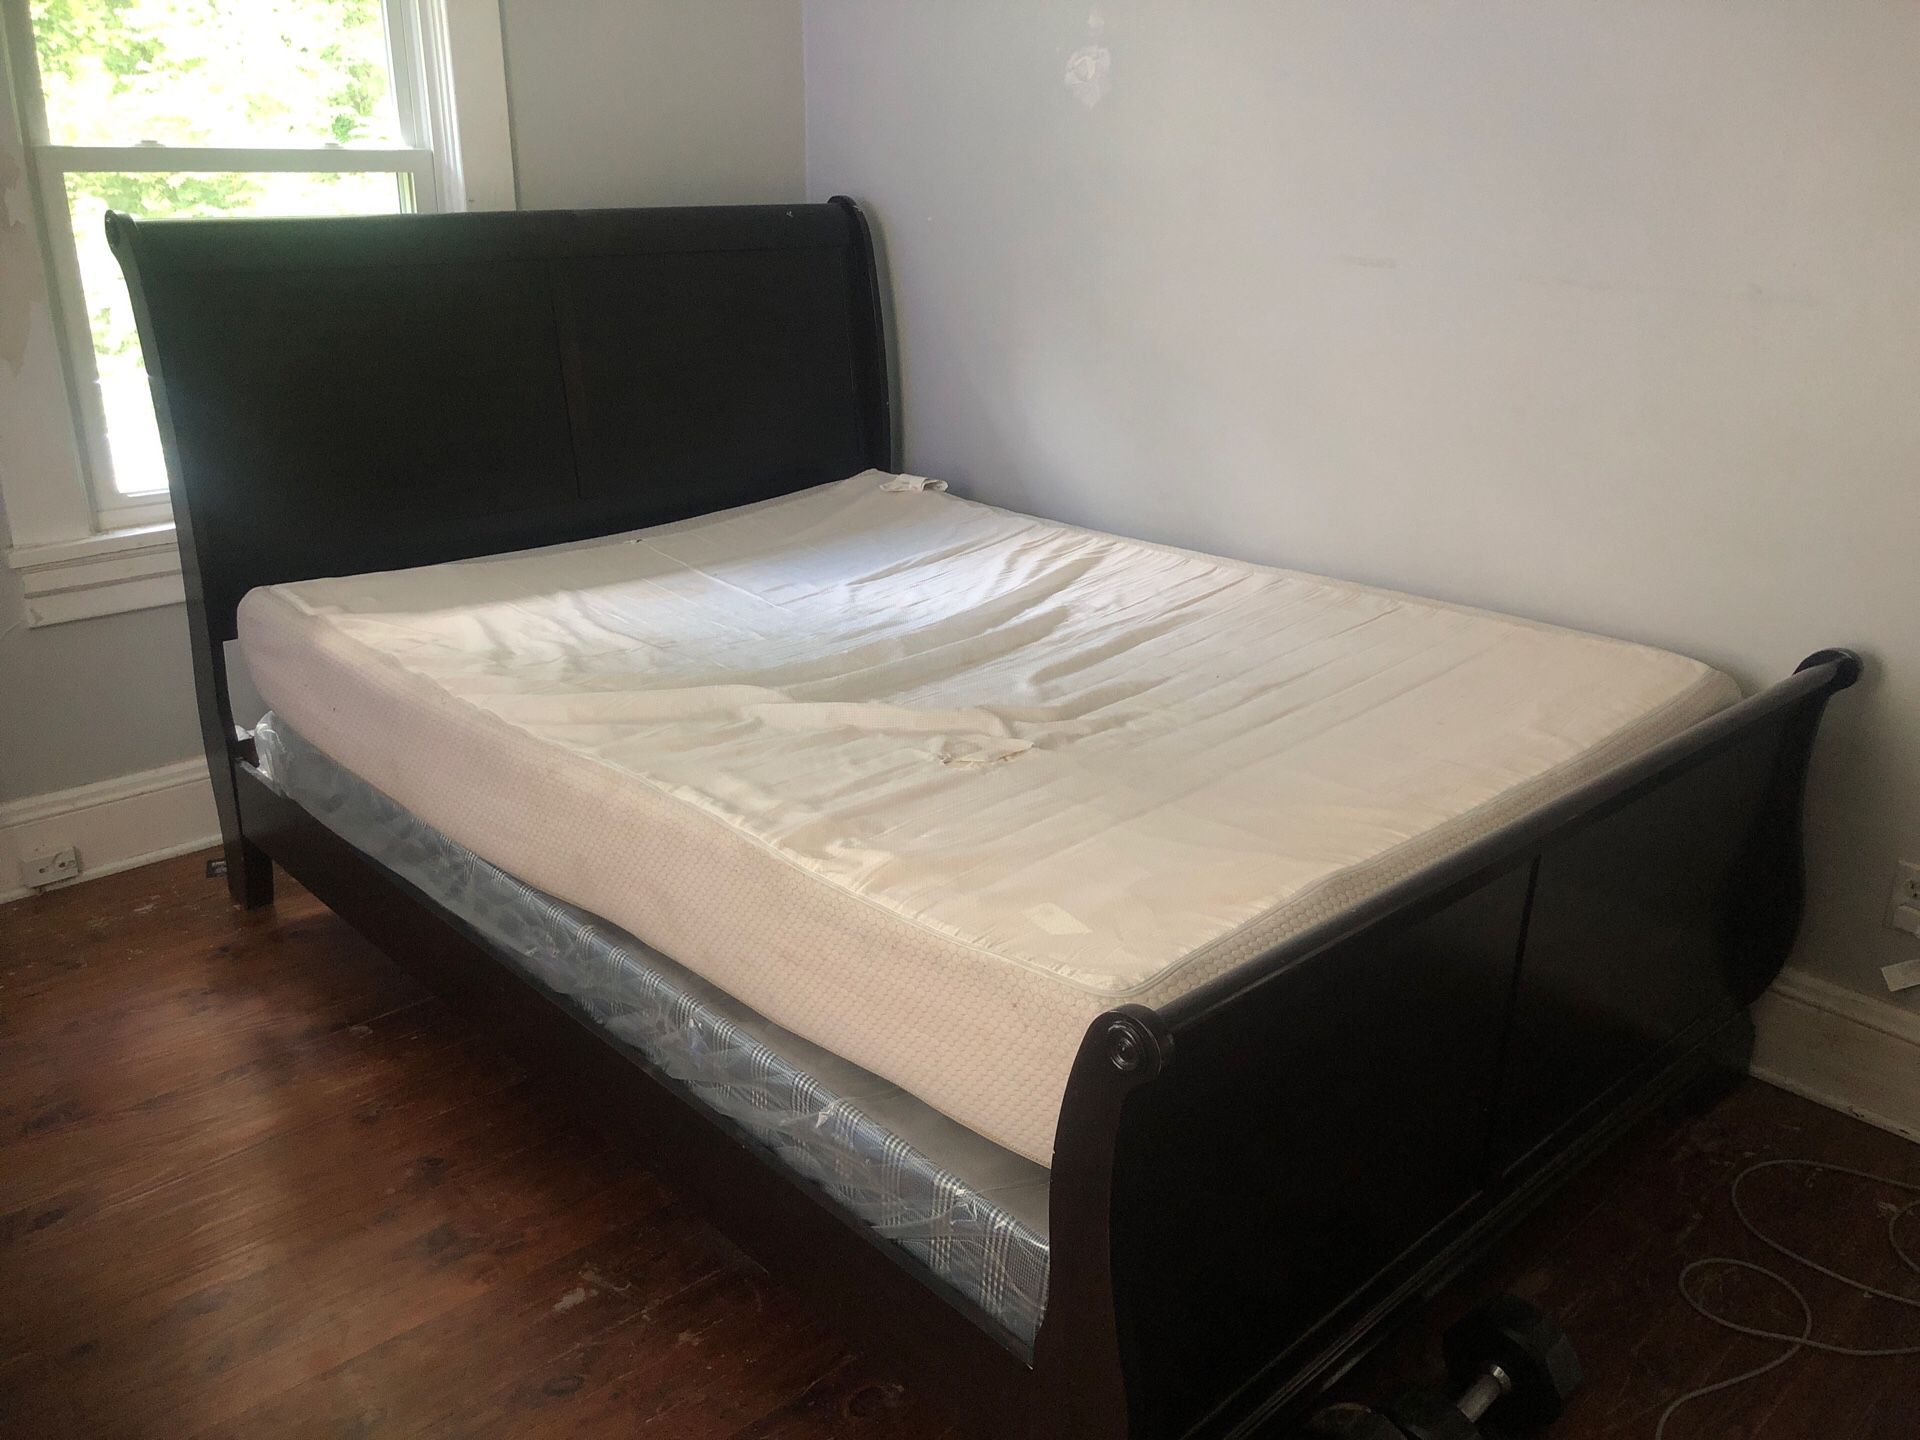 Queen bed and box spring